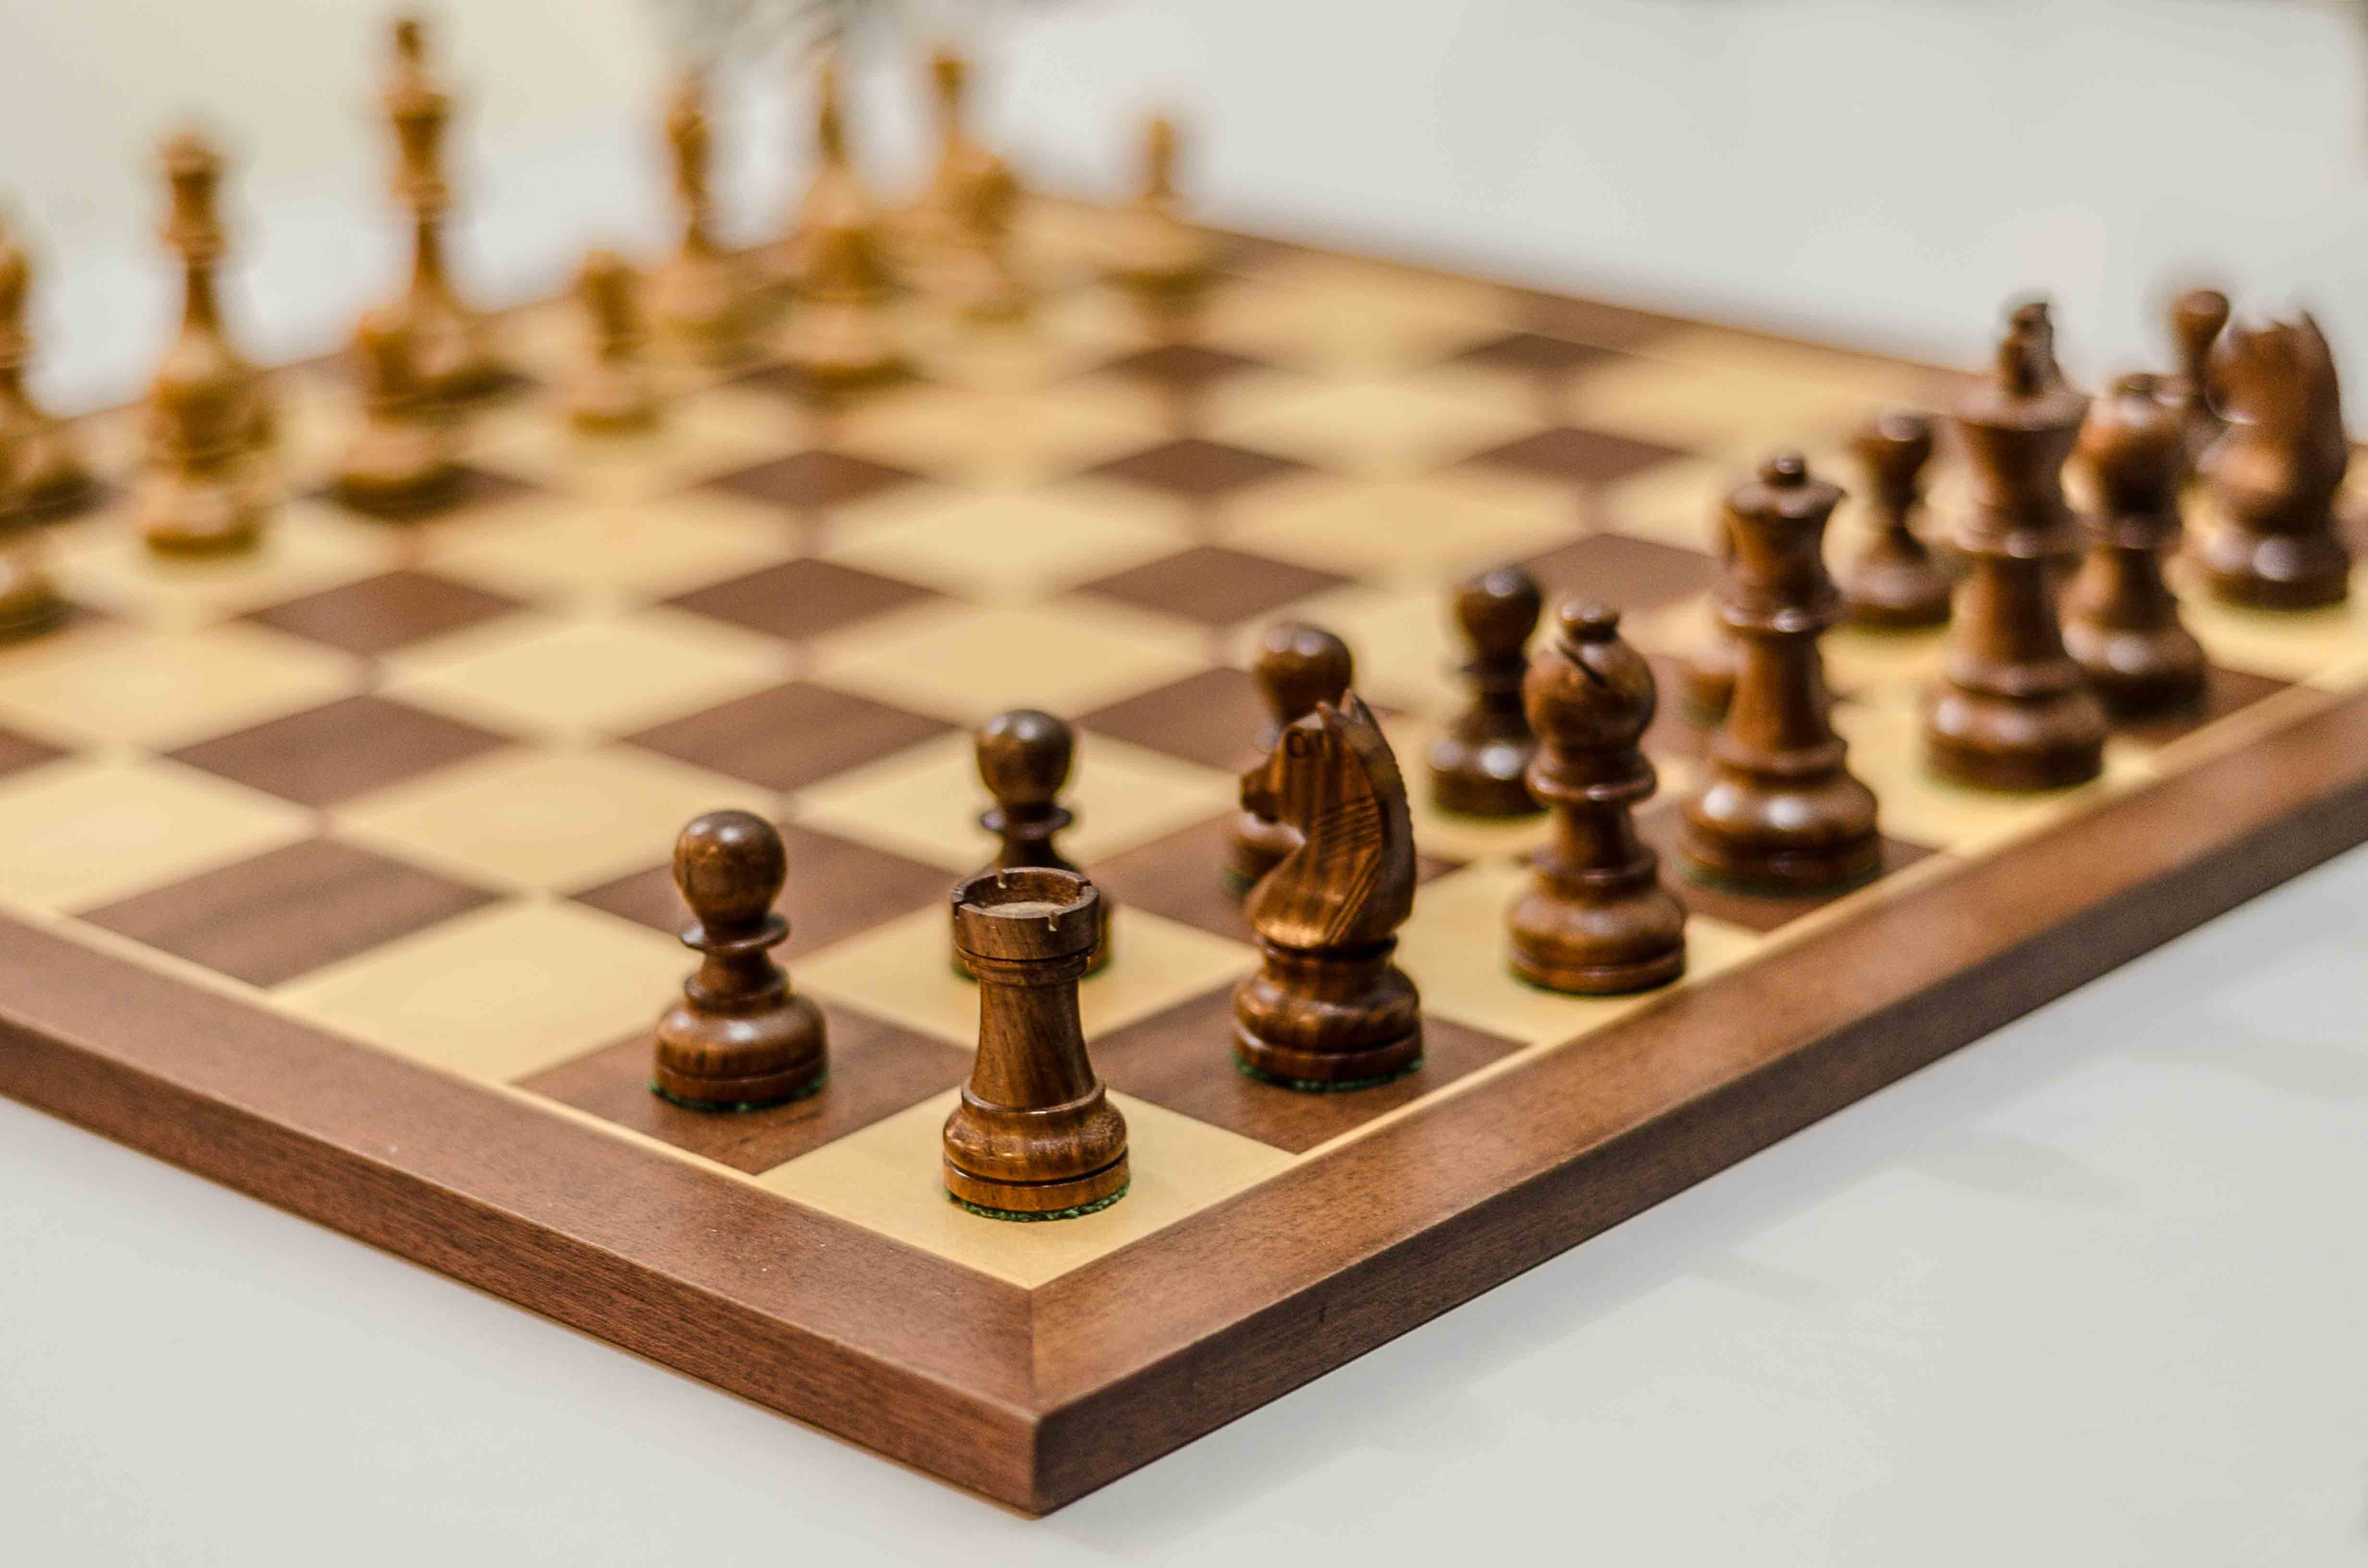 A wooden chess board ready for play, set with tan and maple pieces.